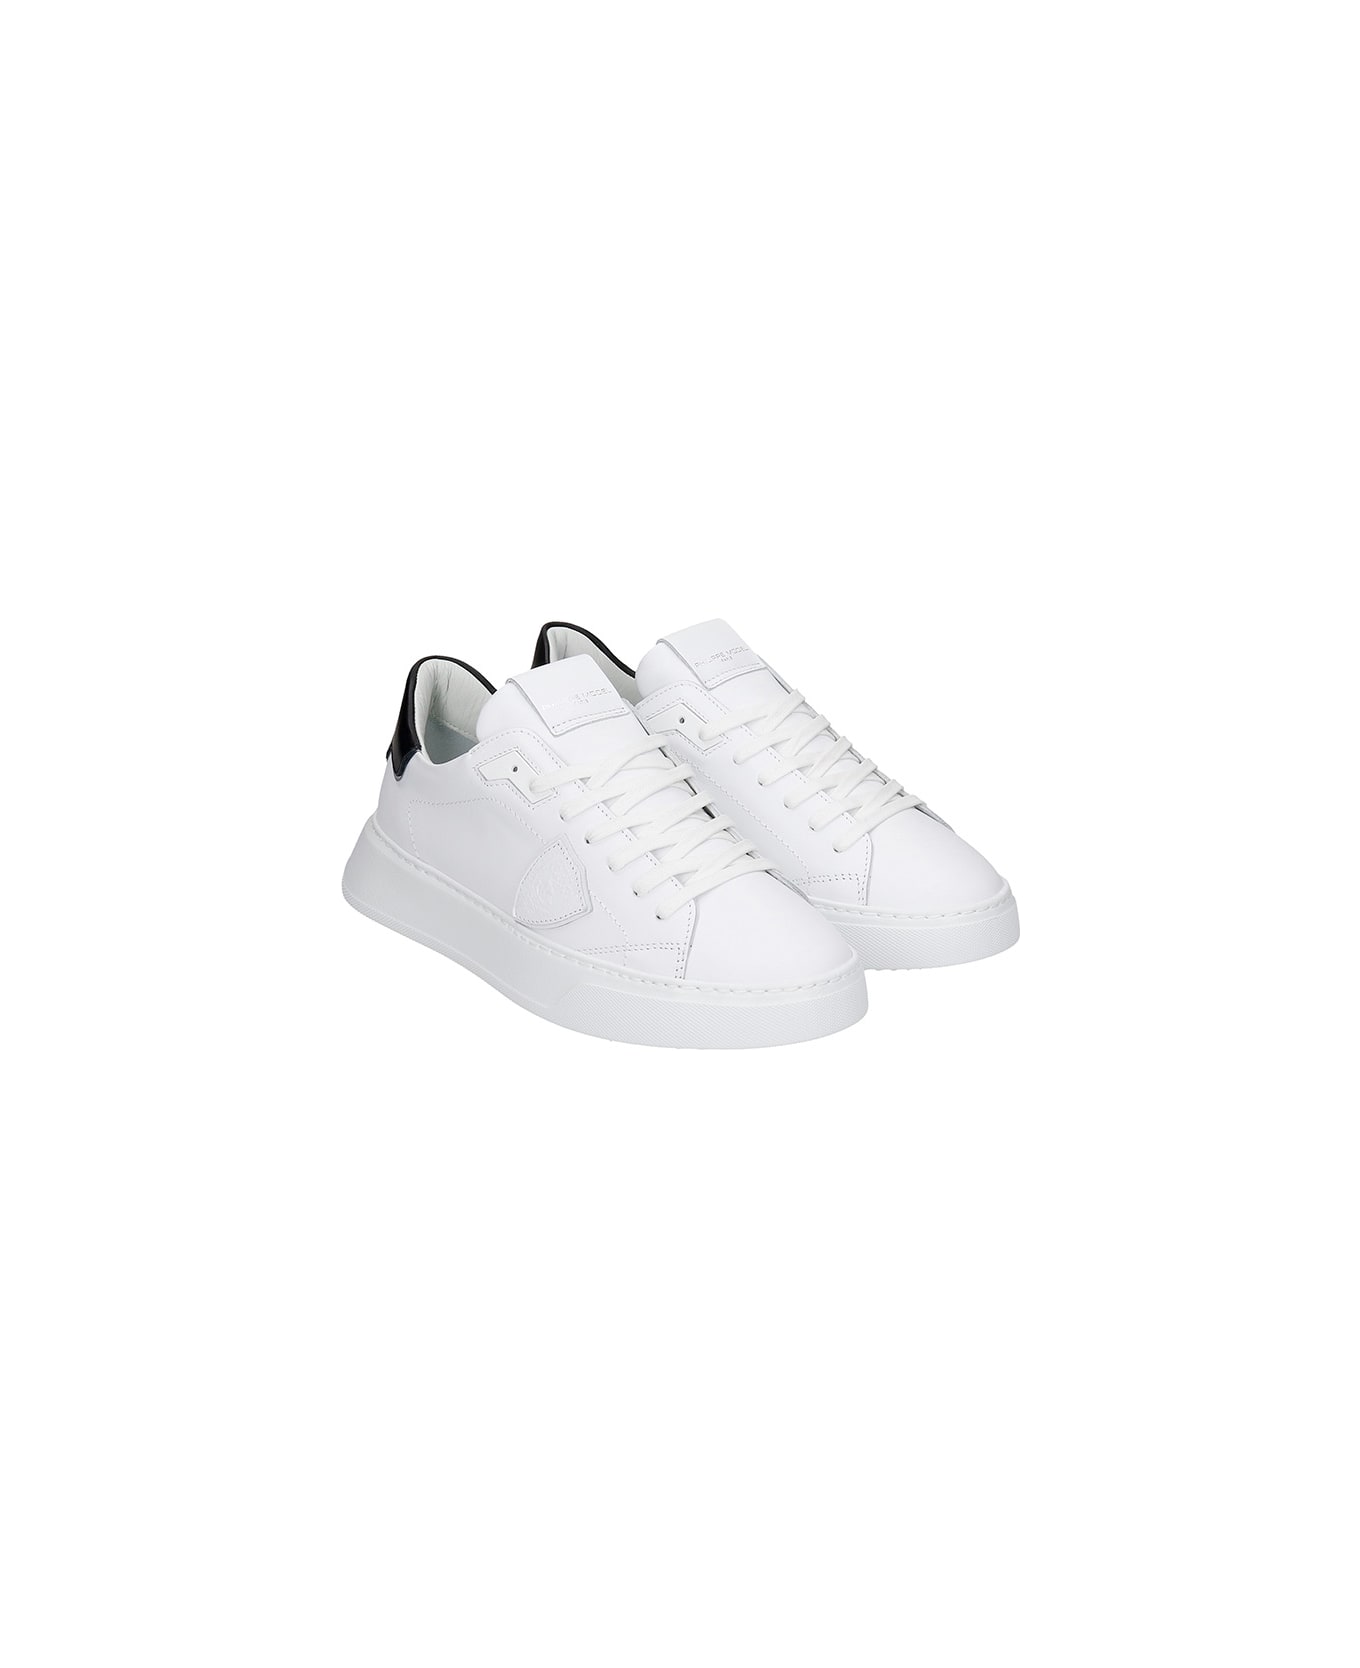 Philippe Model Temple L Sneakers In White Leather スニーカー